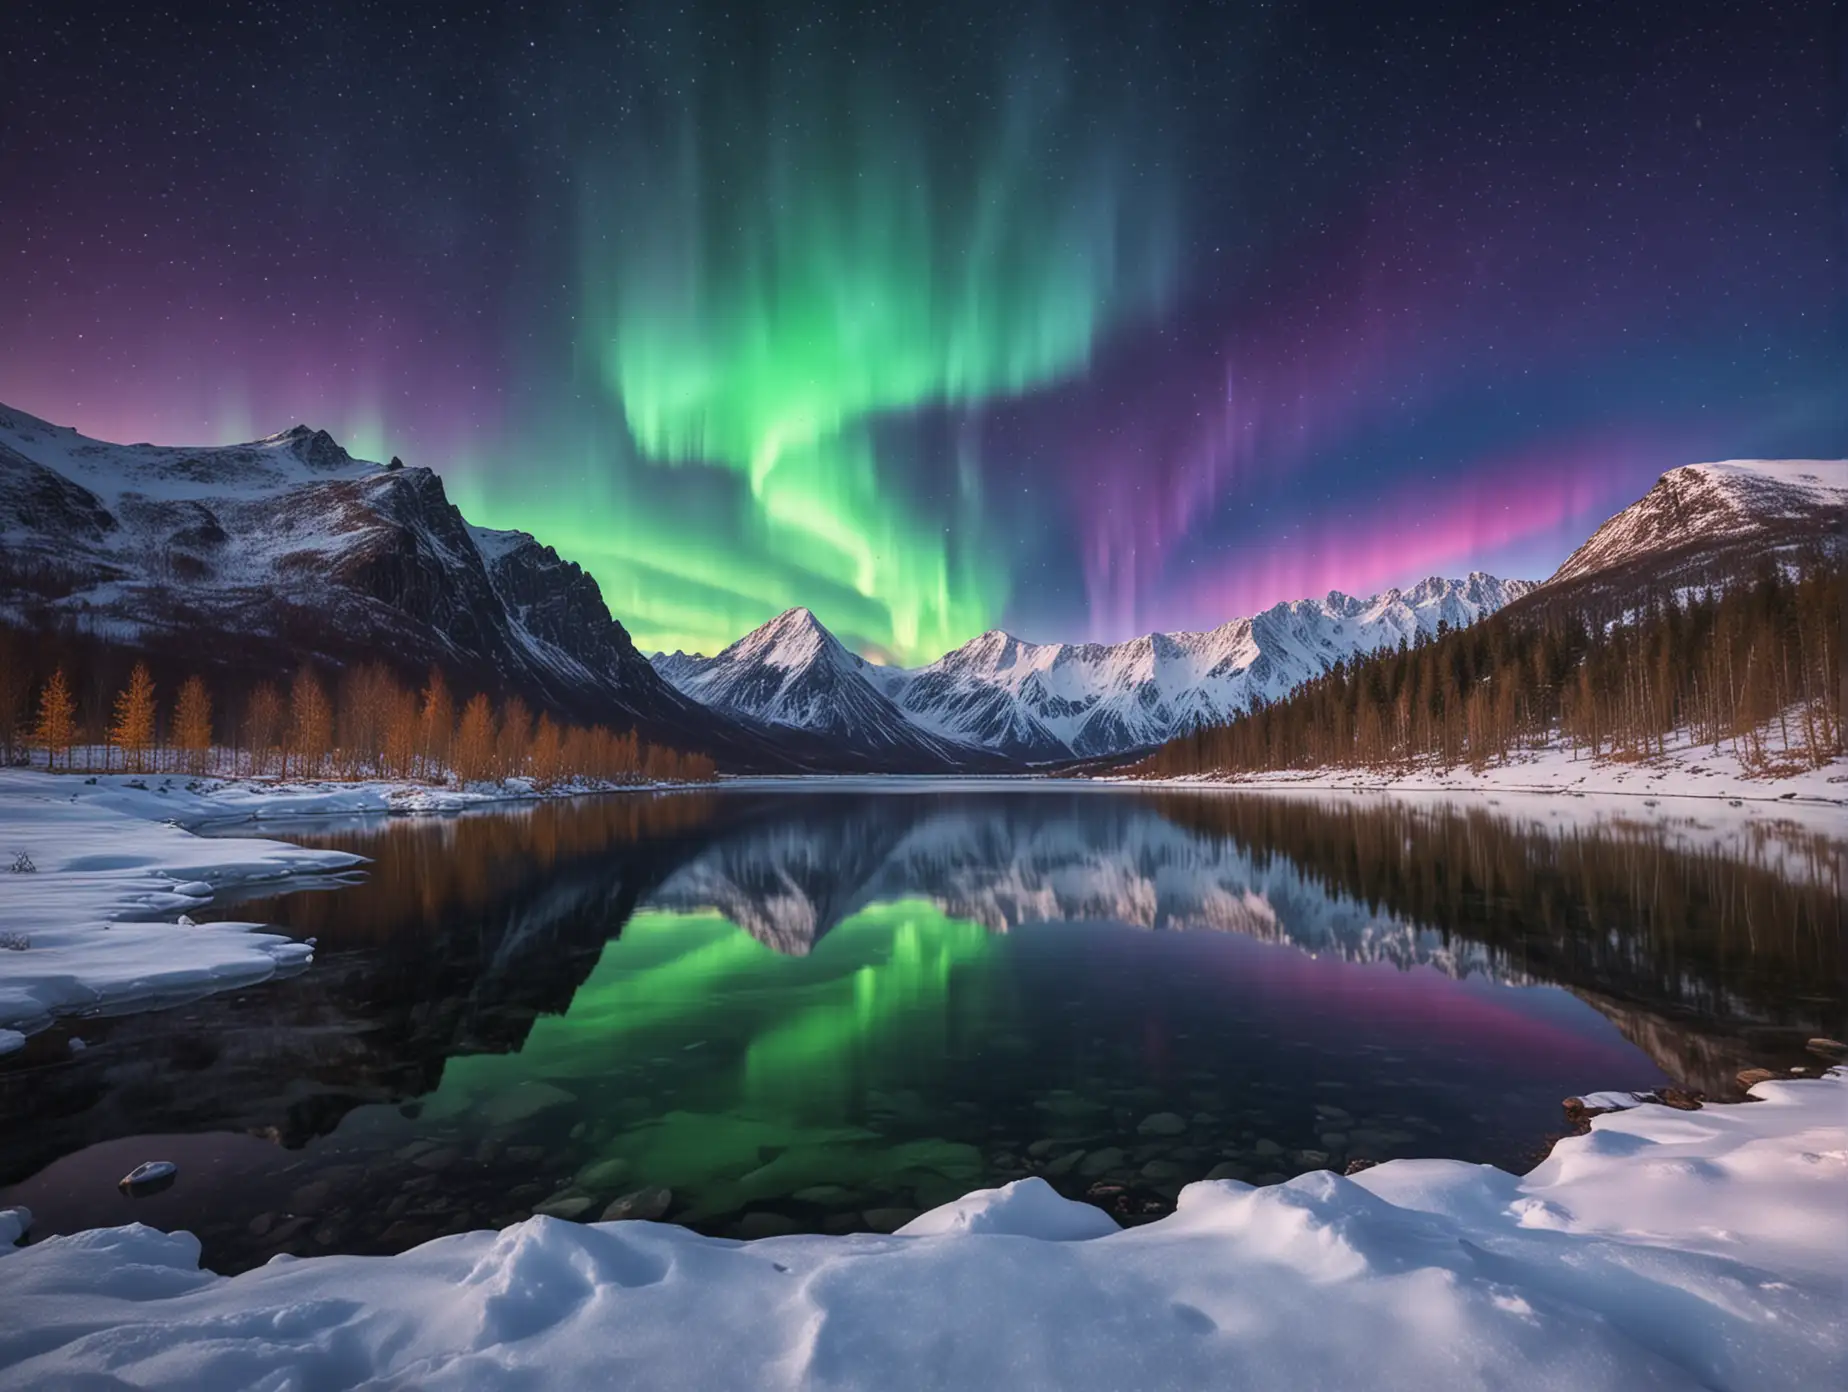 Beautiful colorful aurora borealis over the snow-capped mountains and lake